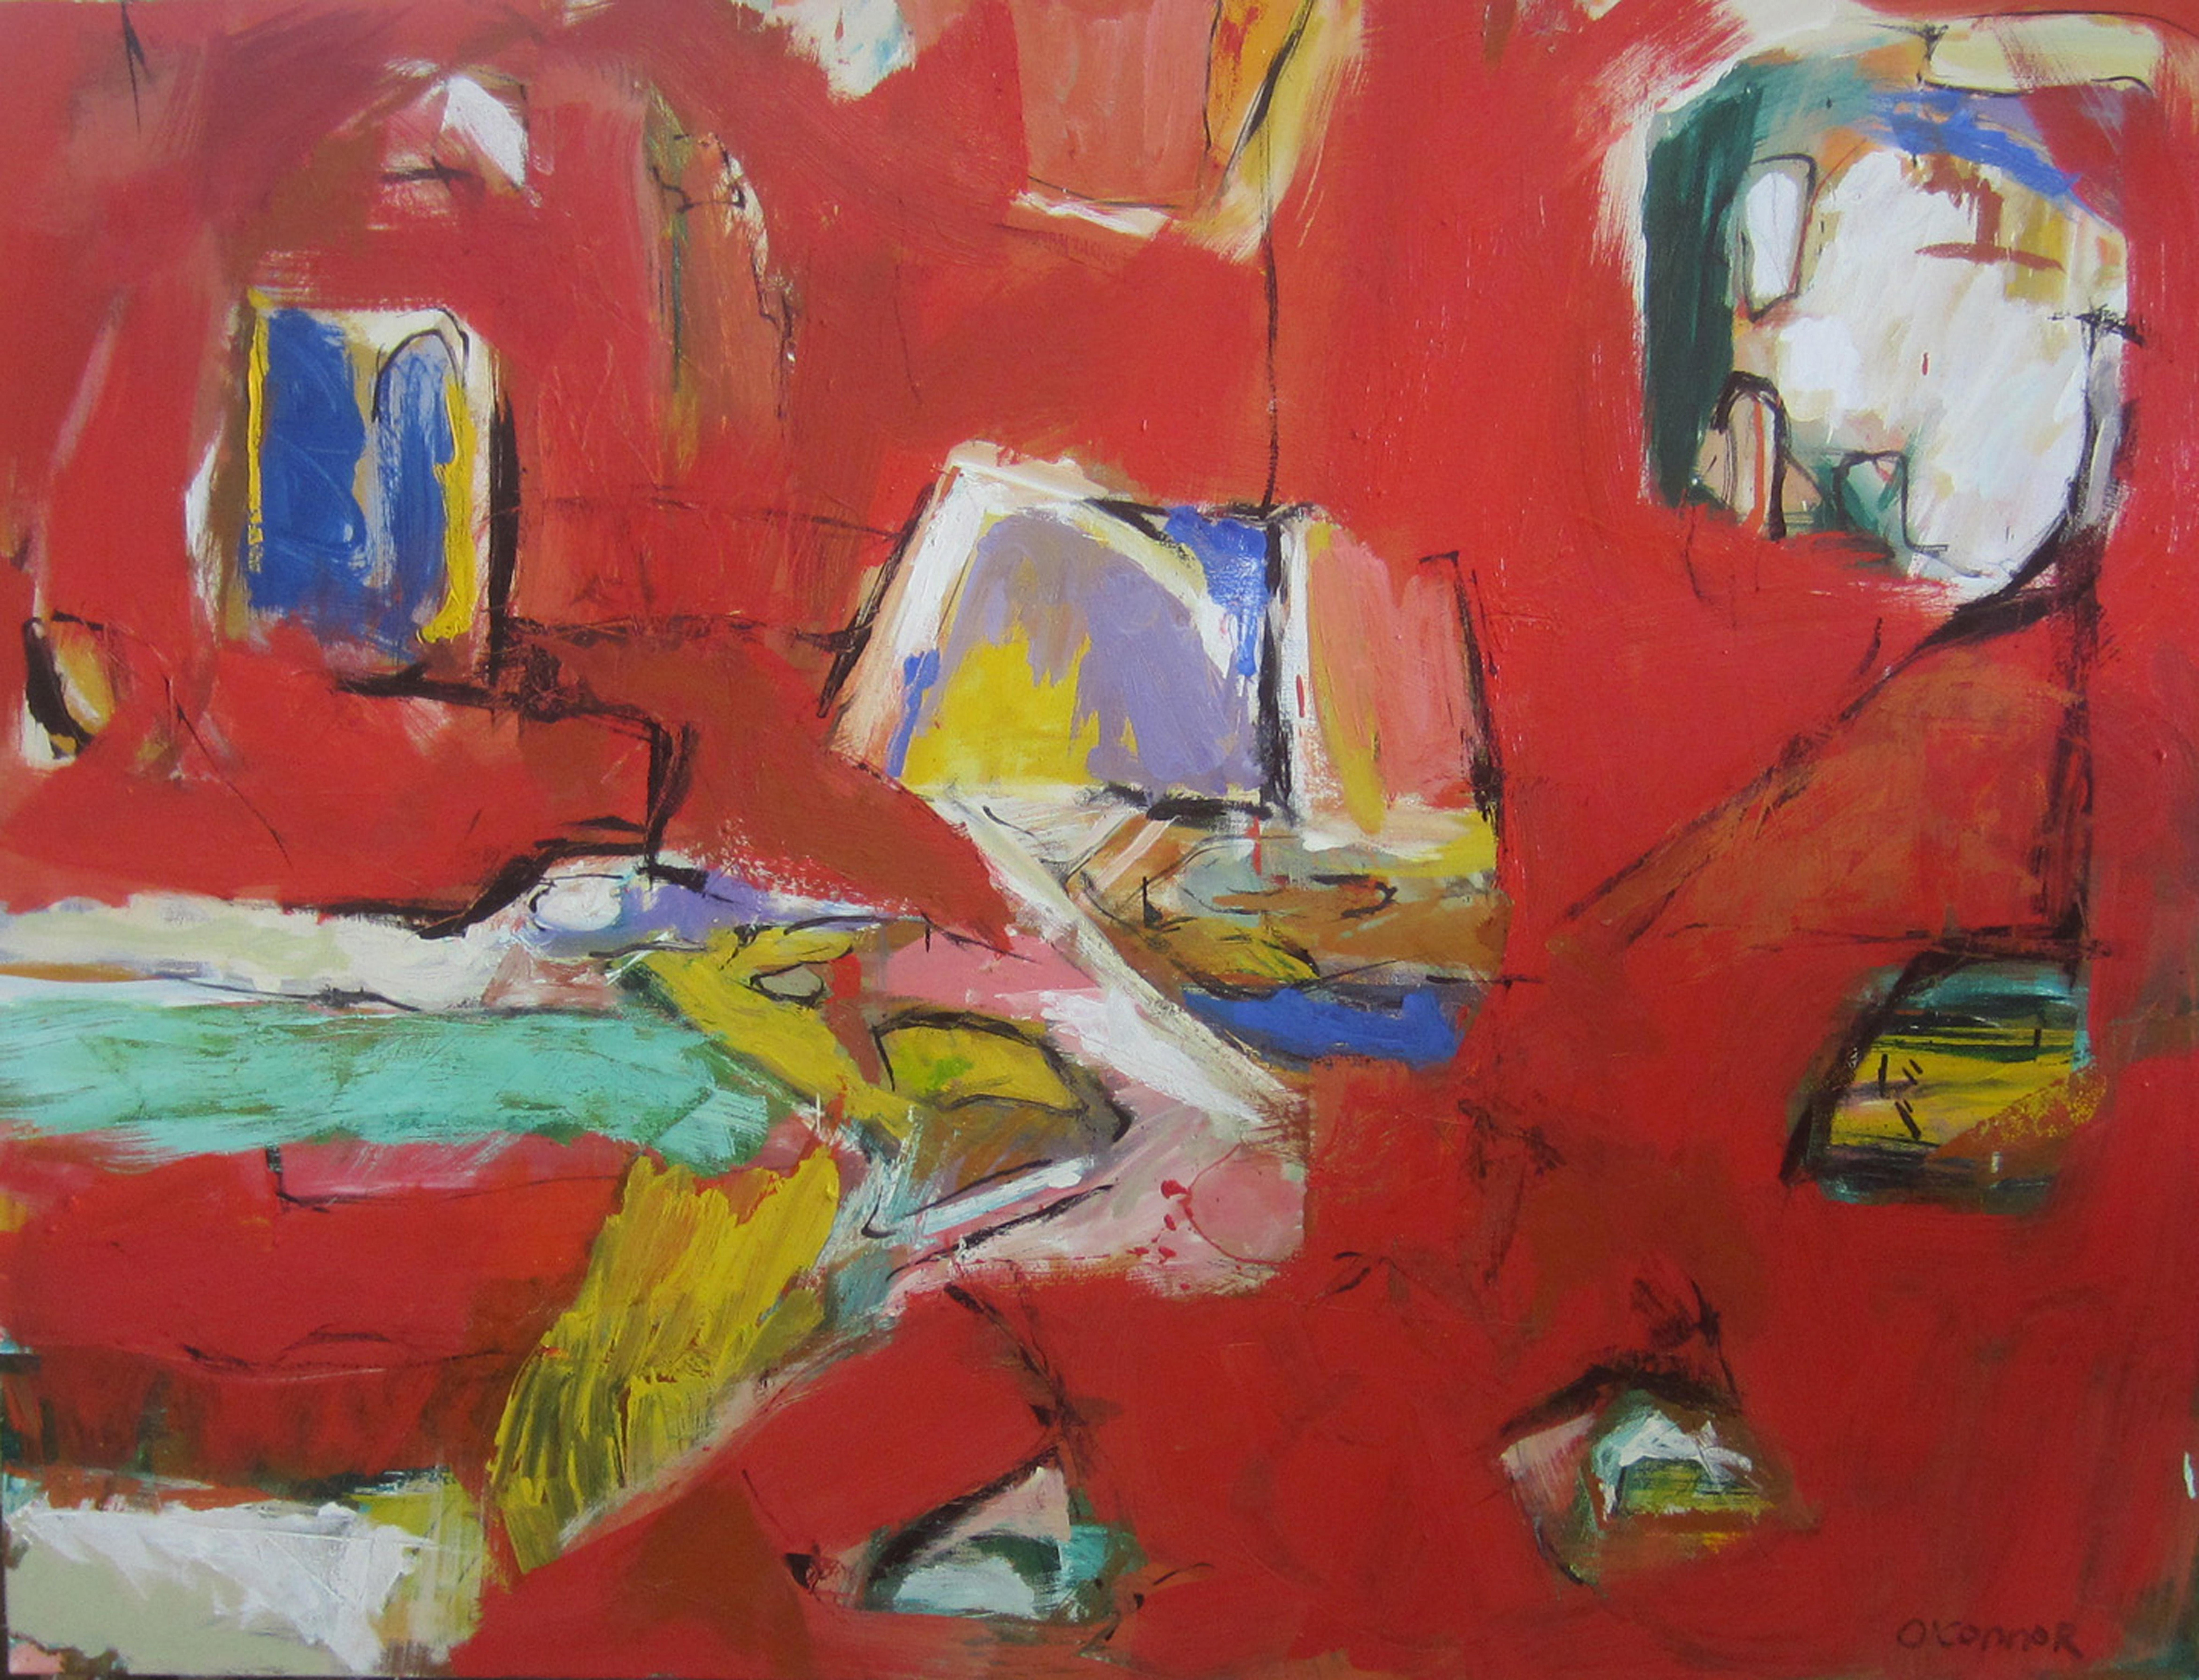 William O'Connor Abstract Painting - SONGBIRDS, Original Signed Contemporary Red Abstract Expressionist Painting